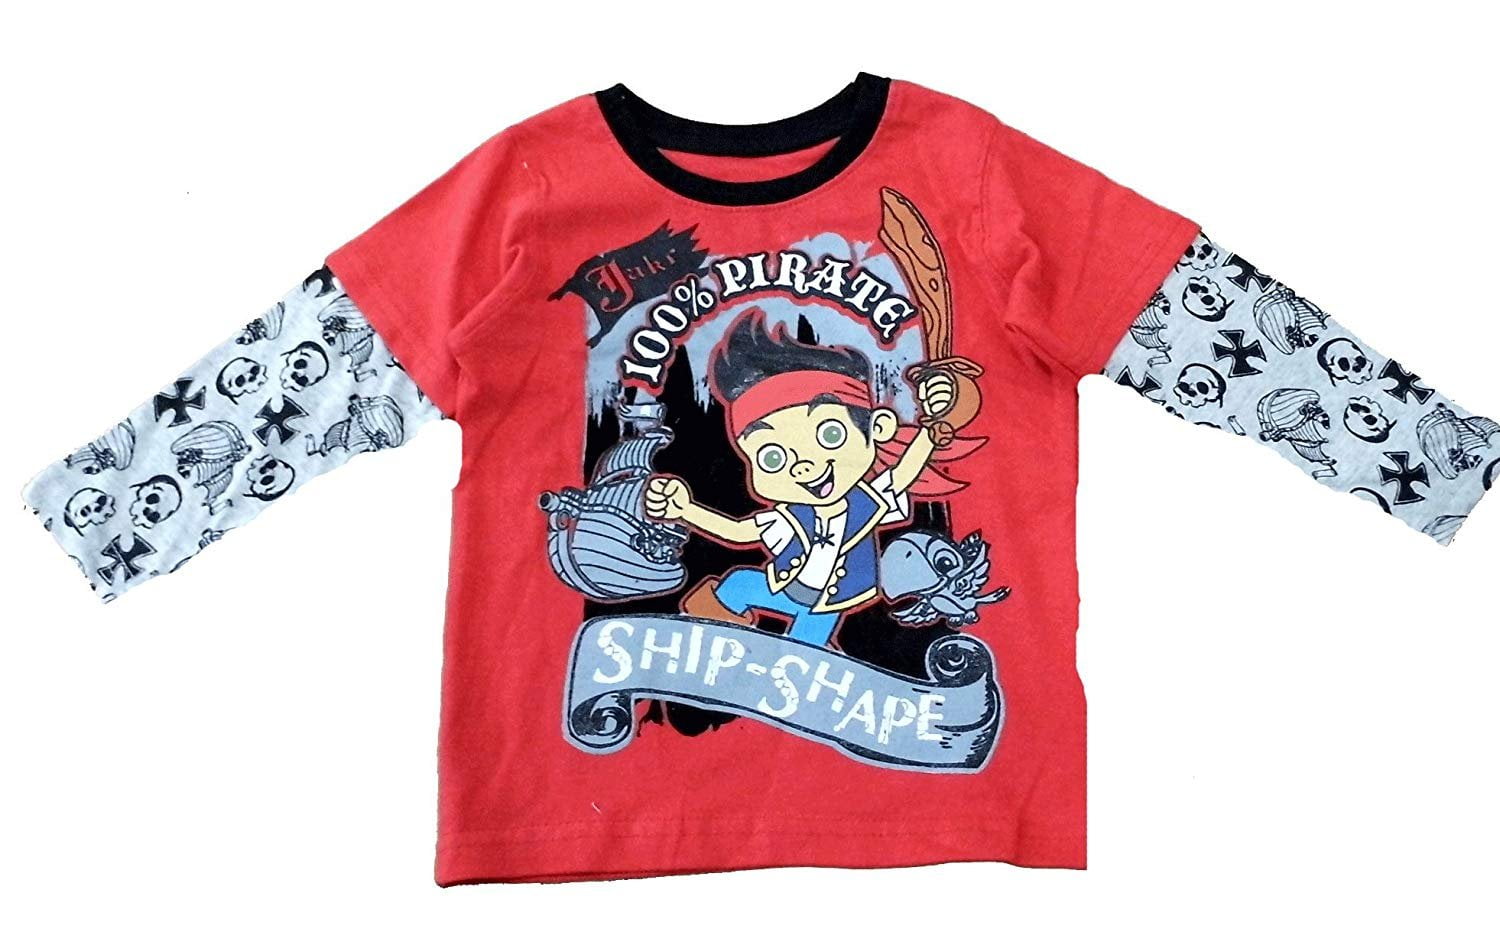 Boys Disney Jake and the Neverland Pirates T Shirt Top Ages 1-6 Years New Gift 